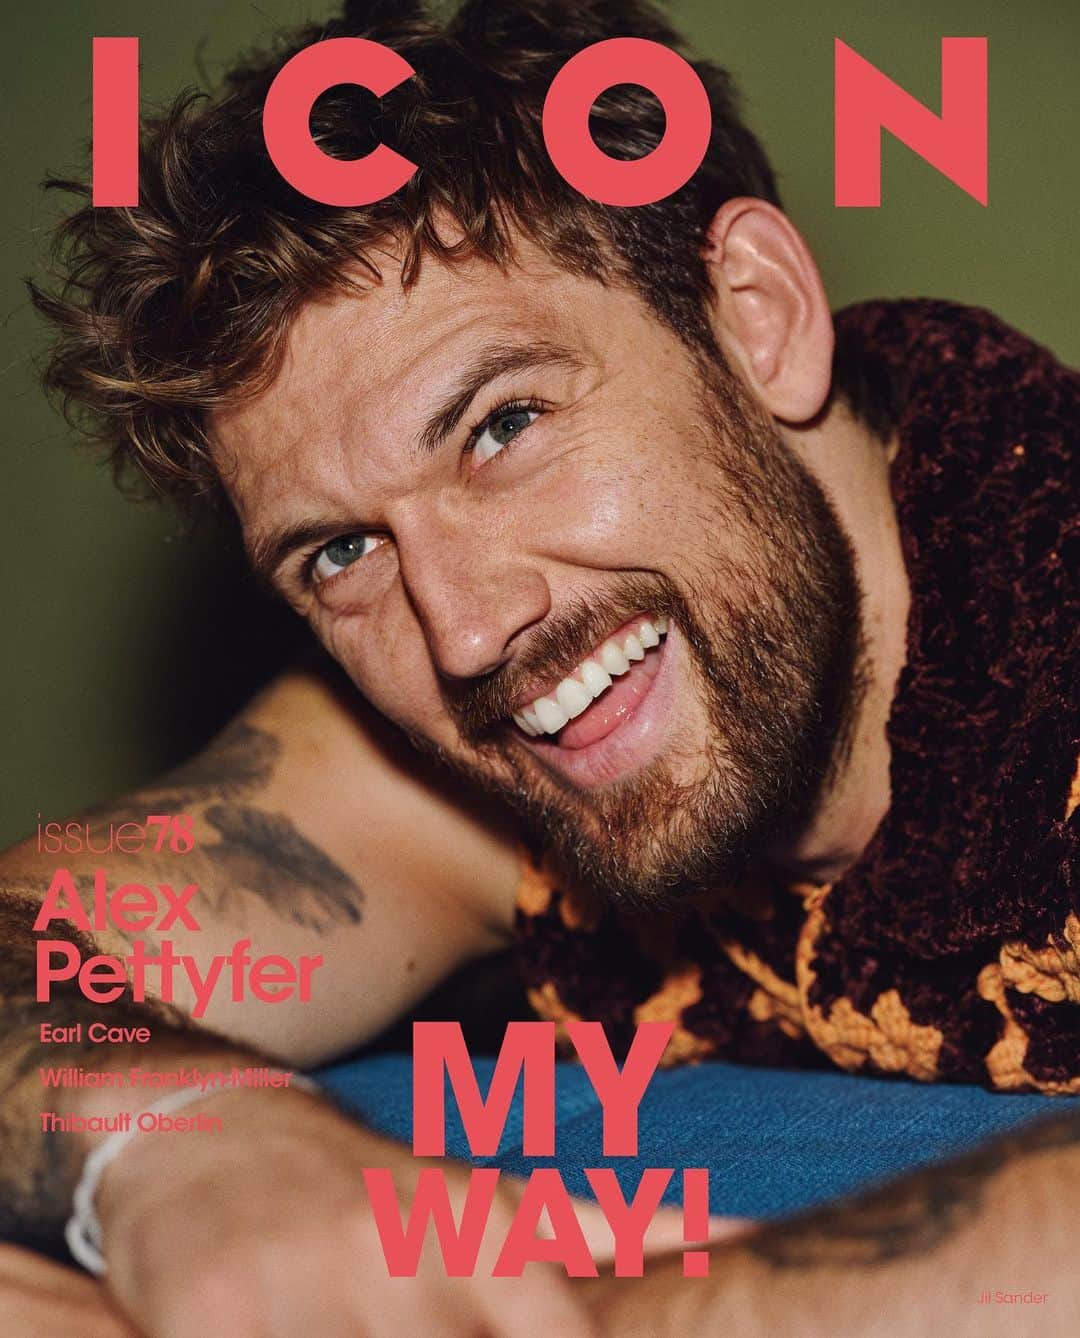 アレックス・ペティファーのインスタグラム：「@alexpettyfer stars on this cover of the new ICON – Out Tomorrow!  Multitalented and achieving success after success, Alex Pettyfer is an actor, producer, and director, full of commitments and with lots of films in the pipeline, such as the one about racing driver James Hunt: “As a kid I wanted to be a Formula 1 driver. Obviously James Hunt was an idol of mine, also Ayrton Senna. To feed my passion for motorsport, my dad took me to the go-kart track. But I’ve always also loved movies. It’s a dream to be able to combine both loves with the second film I’ll direct about the meeting of James Hunt and Richard Burton, called ‘The Weekend’.” Don’t miss the full cover story in ICON 78, on newsstands from tomorrow!  Talento poliedrico capace di percorrere diverse strade con successo, Alex Pettyfer è attore, produttore e regista, pieno di impegni e con tanti film in cantiere, come quello sul pilota James Hunt: “Da ragazzino avrei voluto diventare pilota di Formula 1. Ovviamente James Hunt era il mio idolo, come Ayrton Senna. Per soddisfare la mia passione, mio padre mi portava sulla pista di go kart. Ma ho sempre amato anche il cinema. È un sogno poter combinare queste due passioni nel secondo film che dirigerò, intitolato ‘The Weekend’, che racconta l’incontro tra James Hunt e Richard Burton”. Non perdete l’intervista completa su ICON 78, in edicola da domani!  #AlexPettyfer wears @jilsander  Photographed by @johnbalsom_studio  Styling by @edoardocaniglia  Grooming: @andyatagency  Casting director: @vanessa.contini_ Producer: @leahcosgriff Interview by Roberto Croci  Editor in Chief: @andreatenerani Creative Director: @lucastoppinistudio Editor at Large: @angelo_pannofino  #ICON #ICONmagazine」